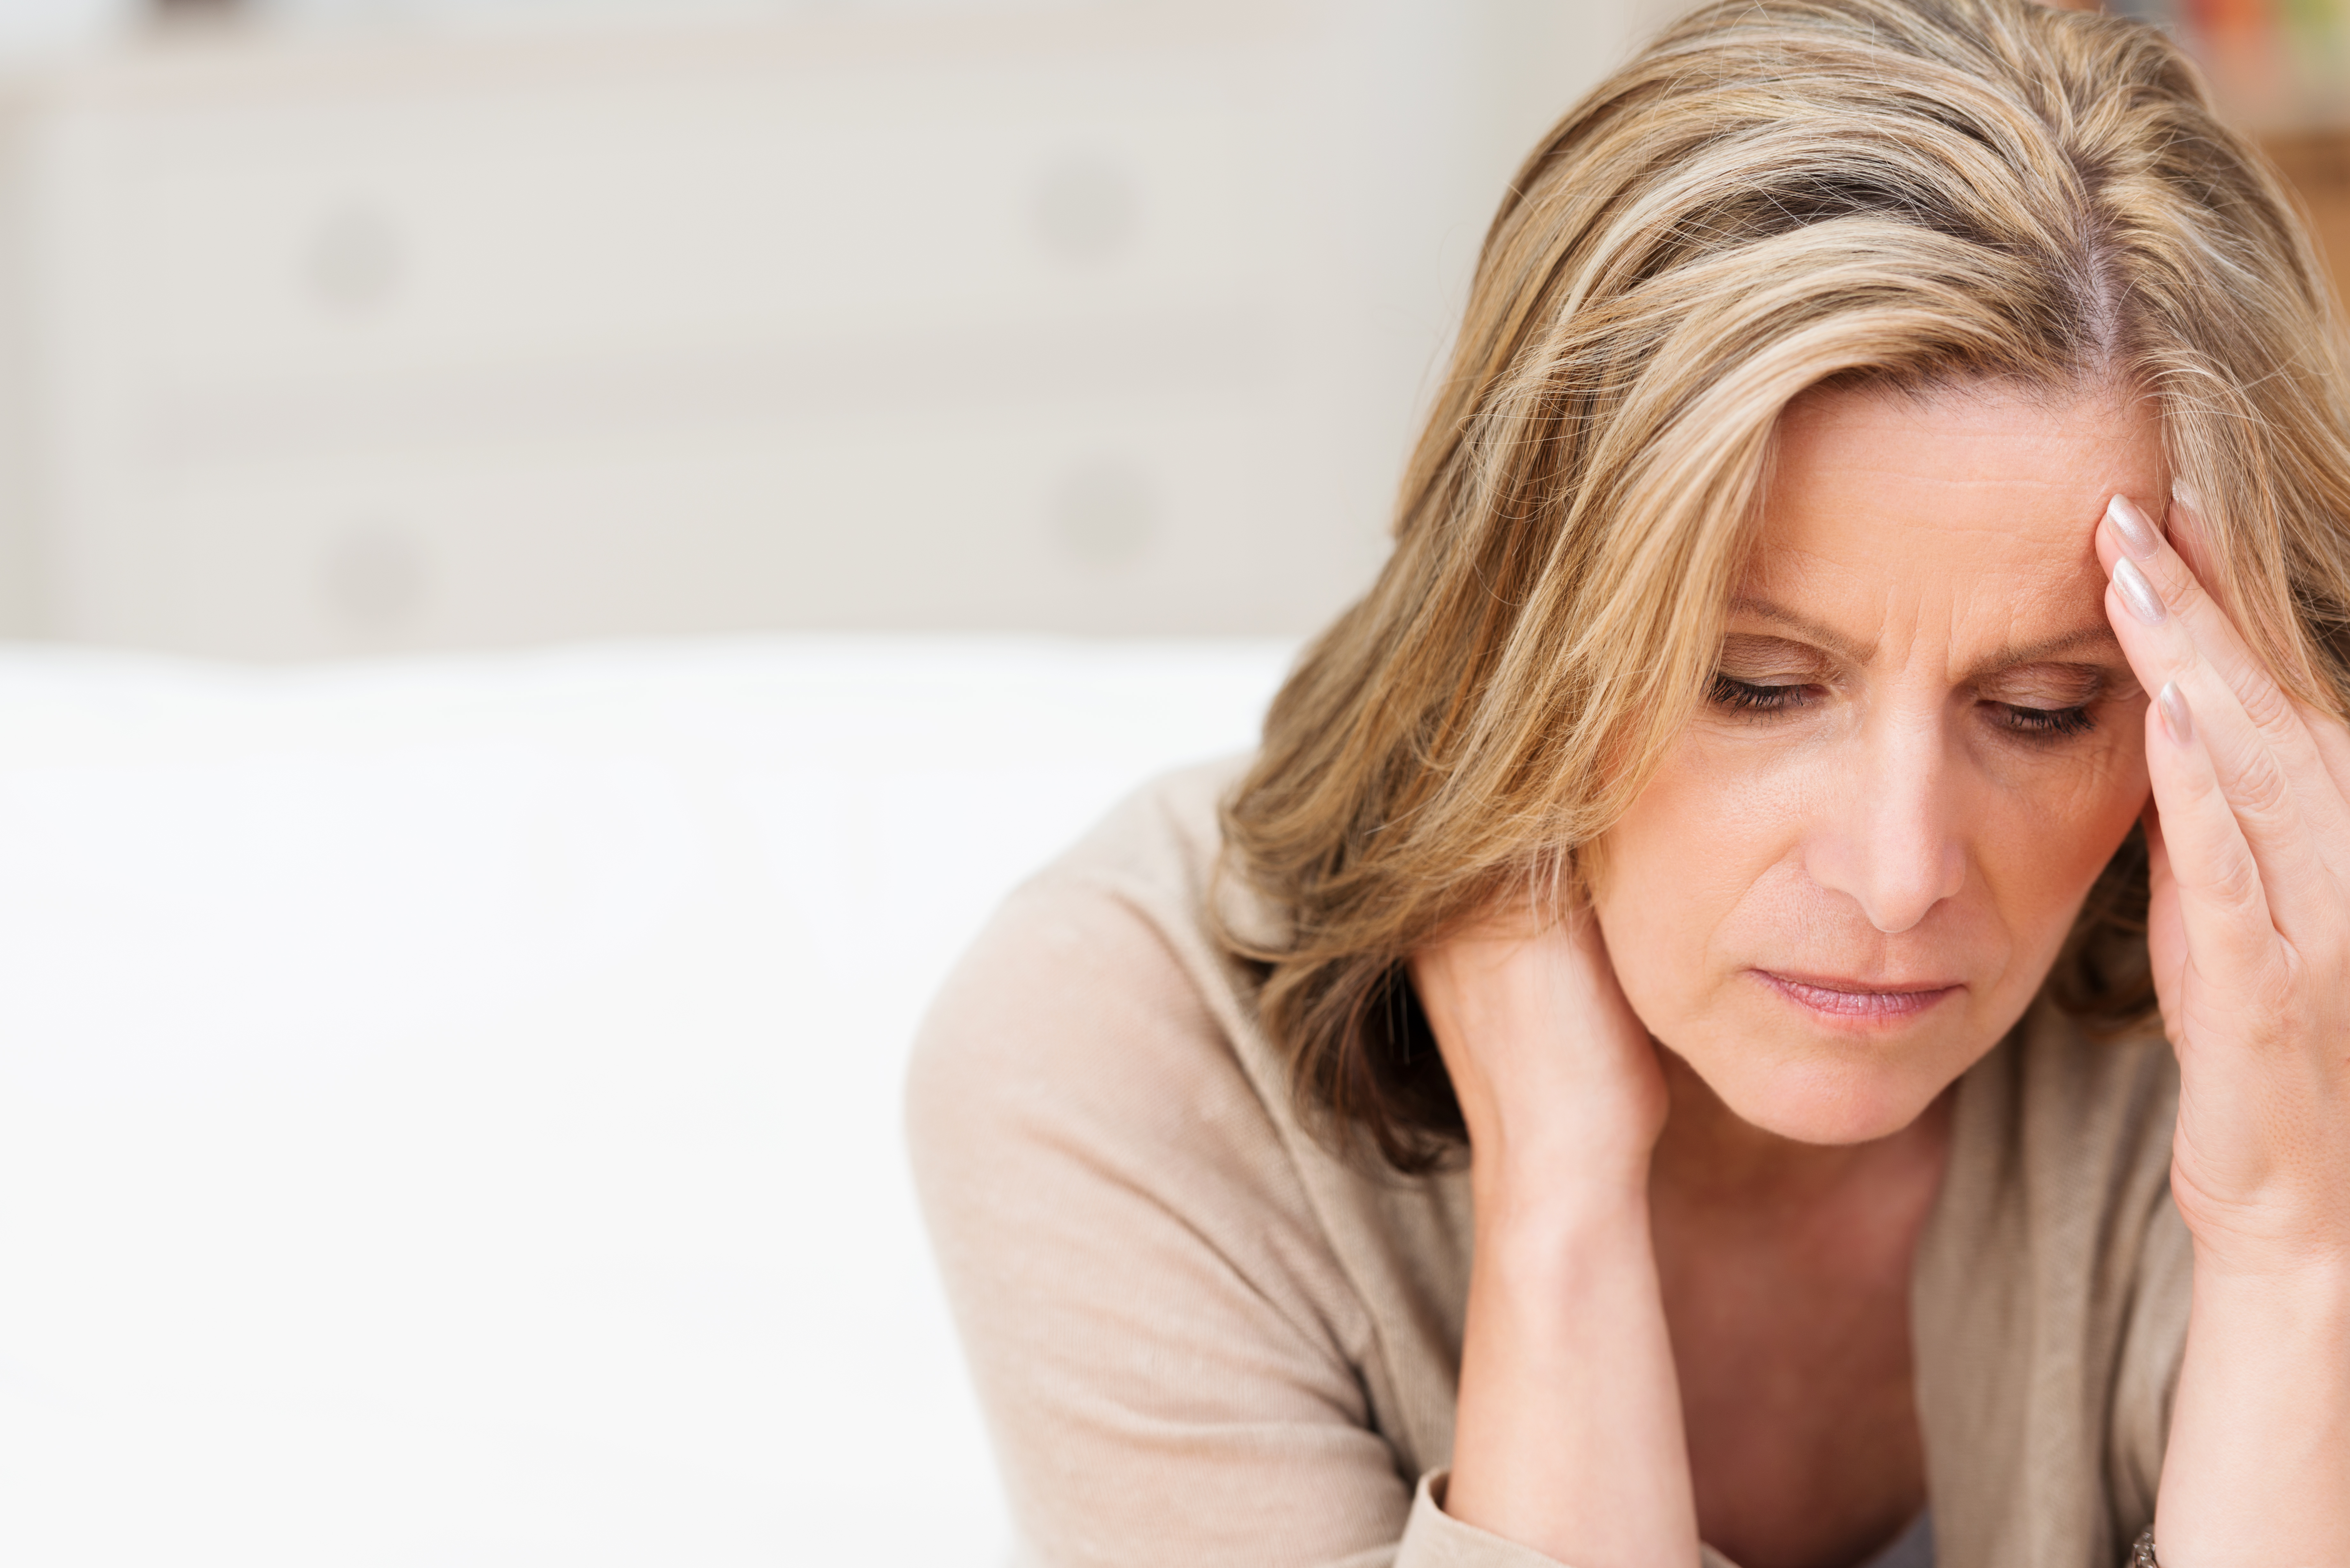 A worried middle-aged woman | Source: Shutterstock